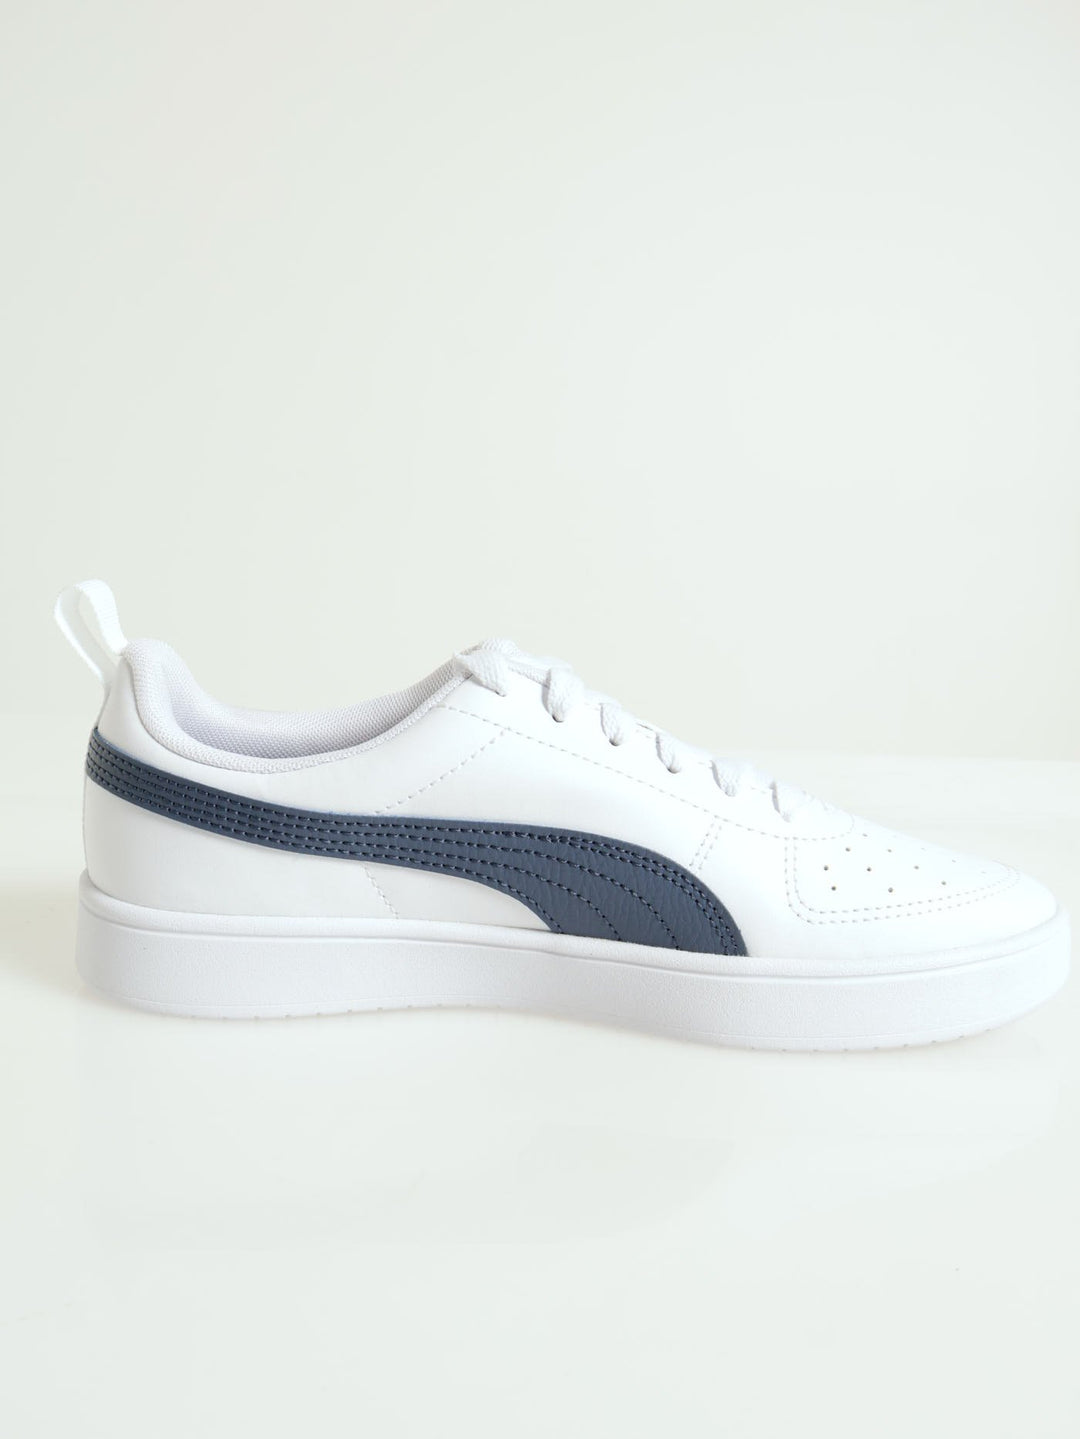 Rickie Basic Closed Toe Lace Up Sneaker - White/Blue